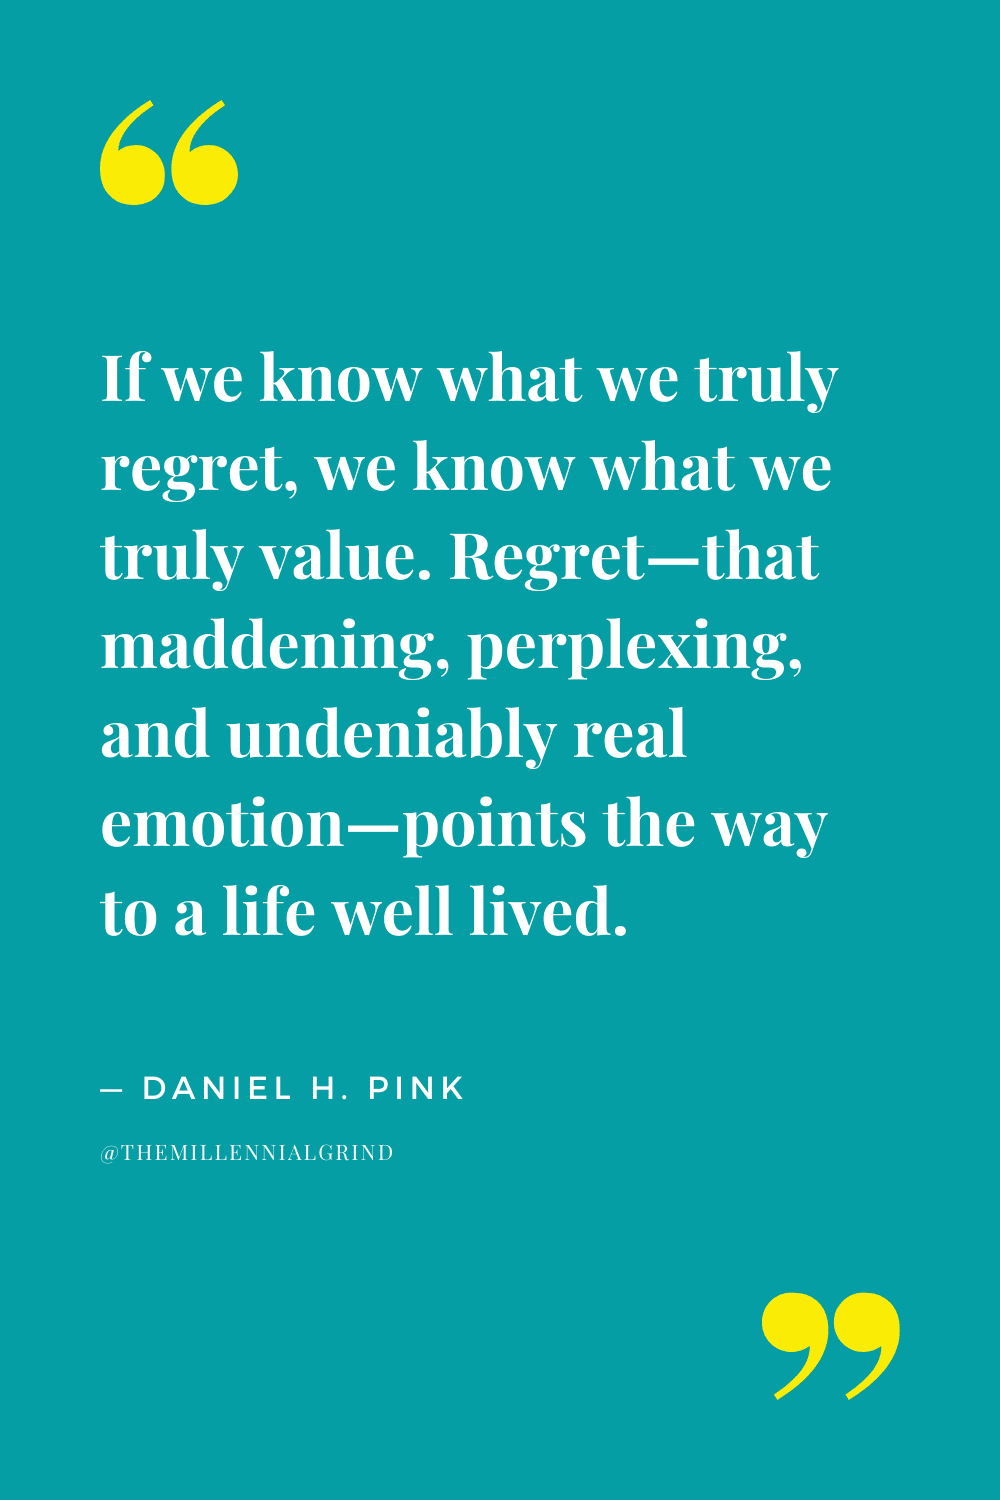 Quotes from The Power of Regret by Daniel H. Pink